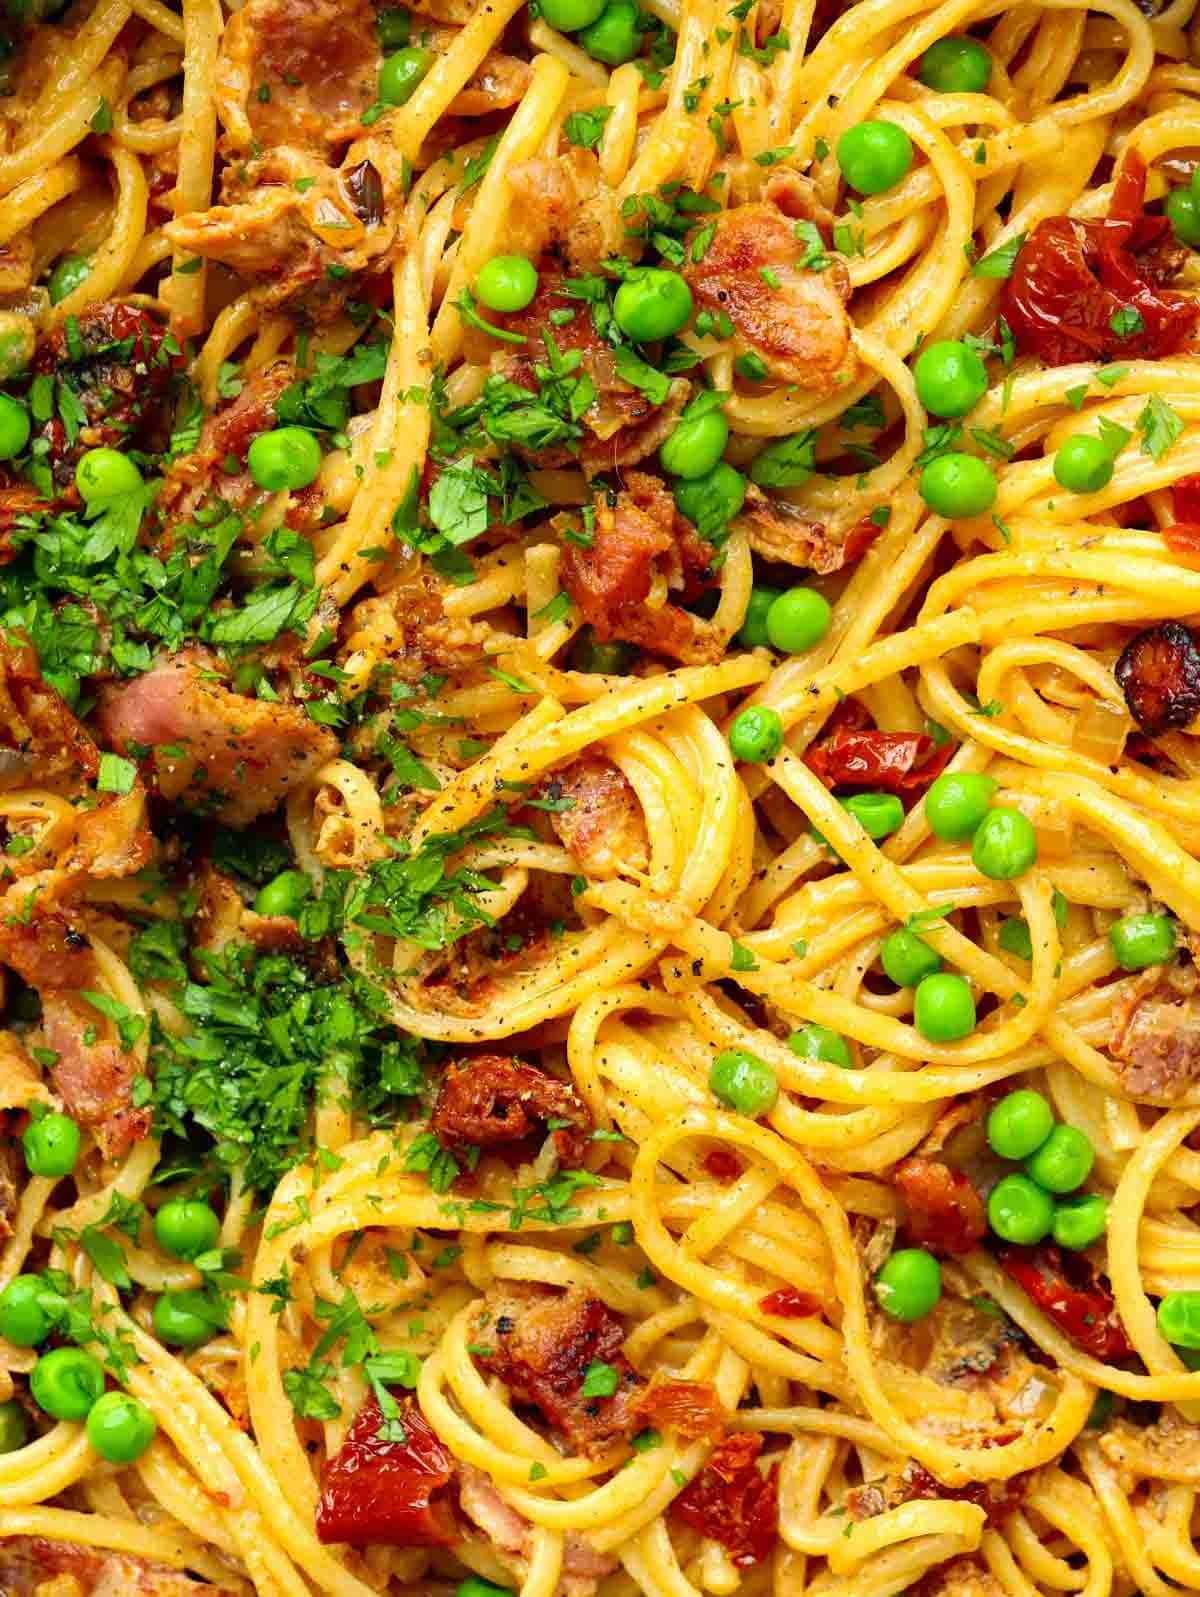 A mixture of bacon, peas and spaghetti ready to eat.